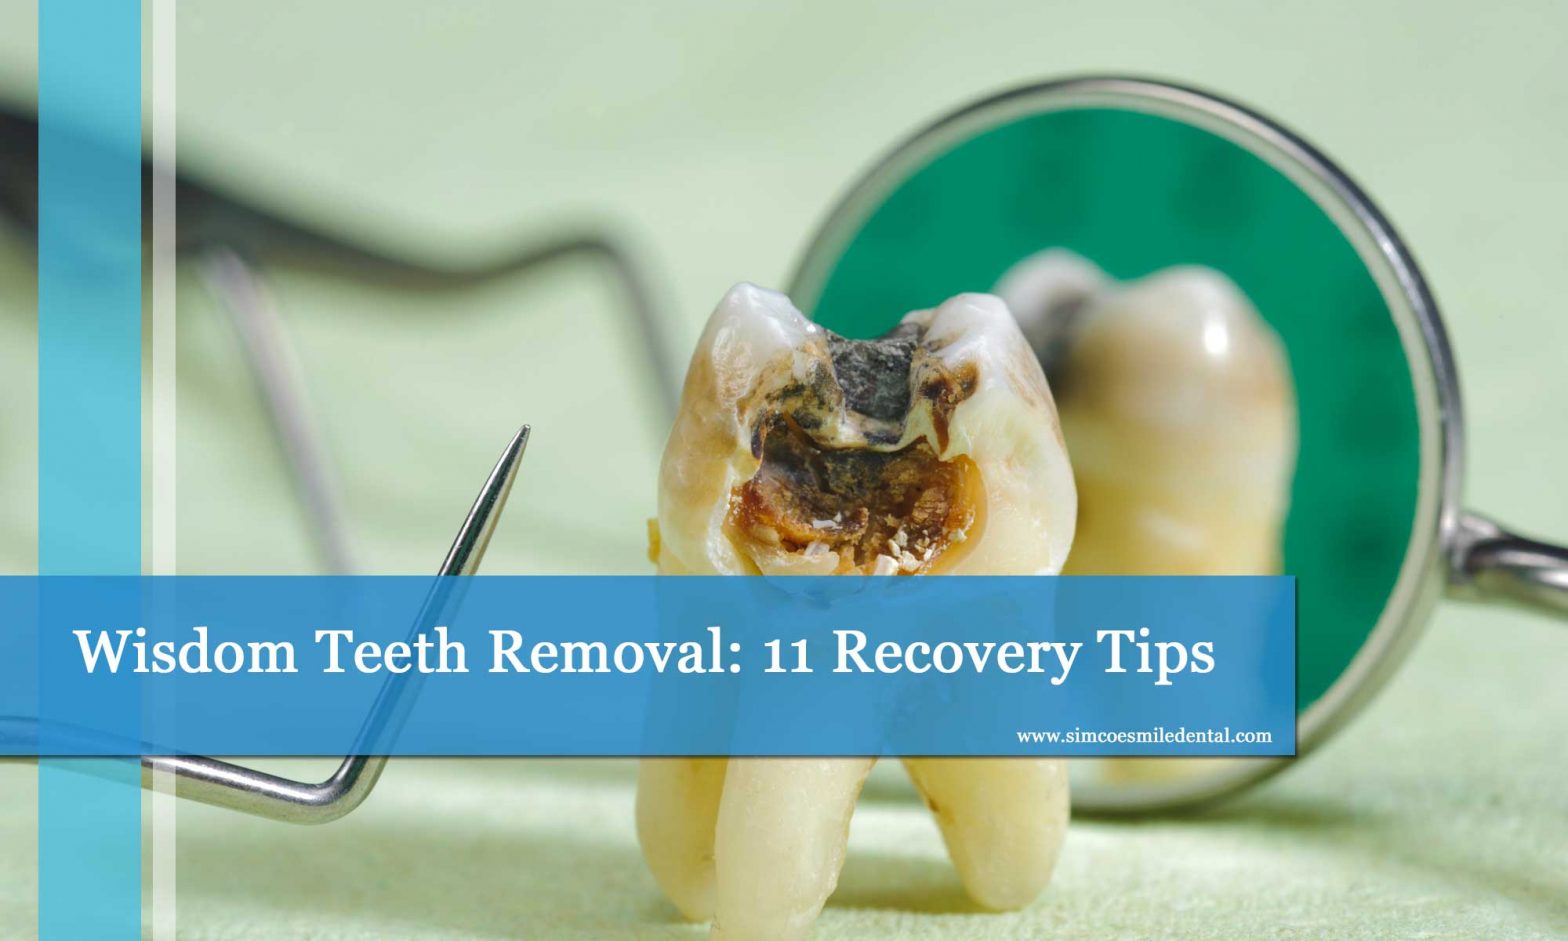 Wisdom Teeth Removal: 11 Recovery Tips